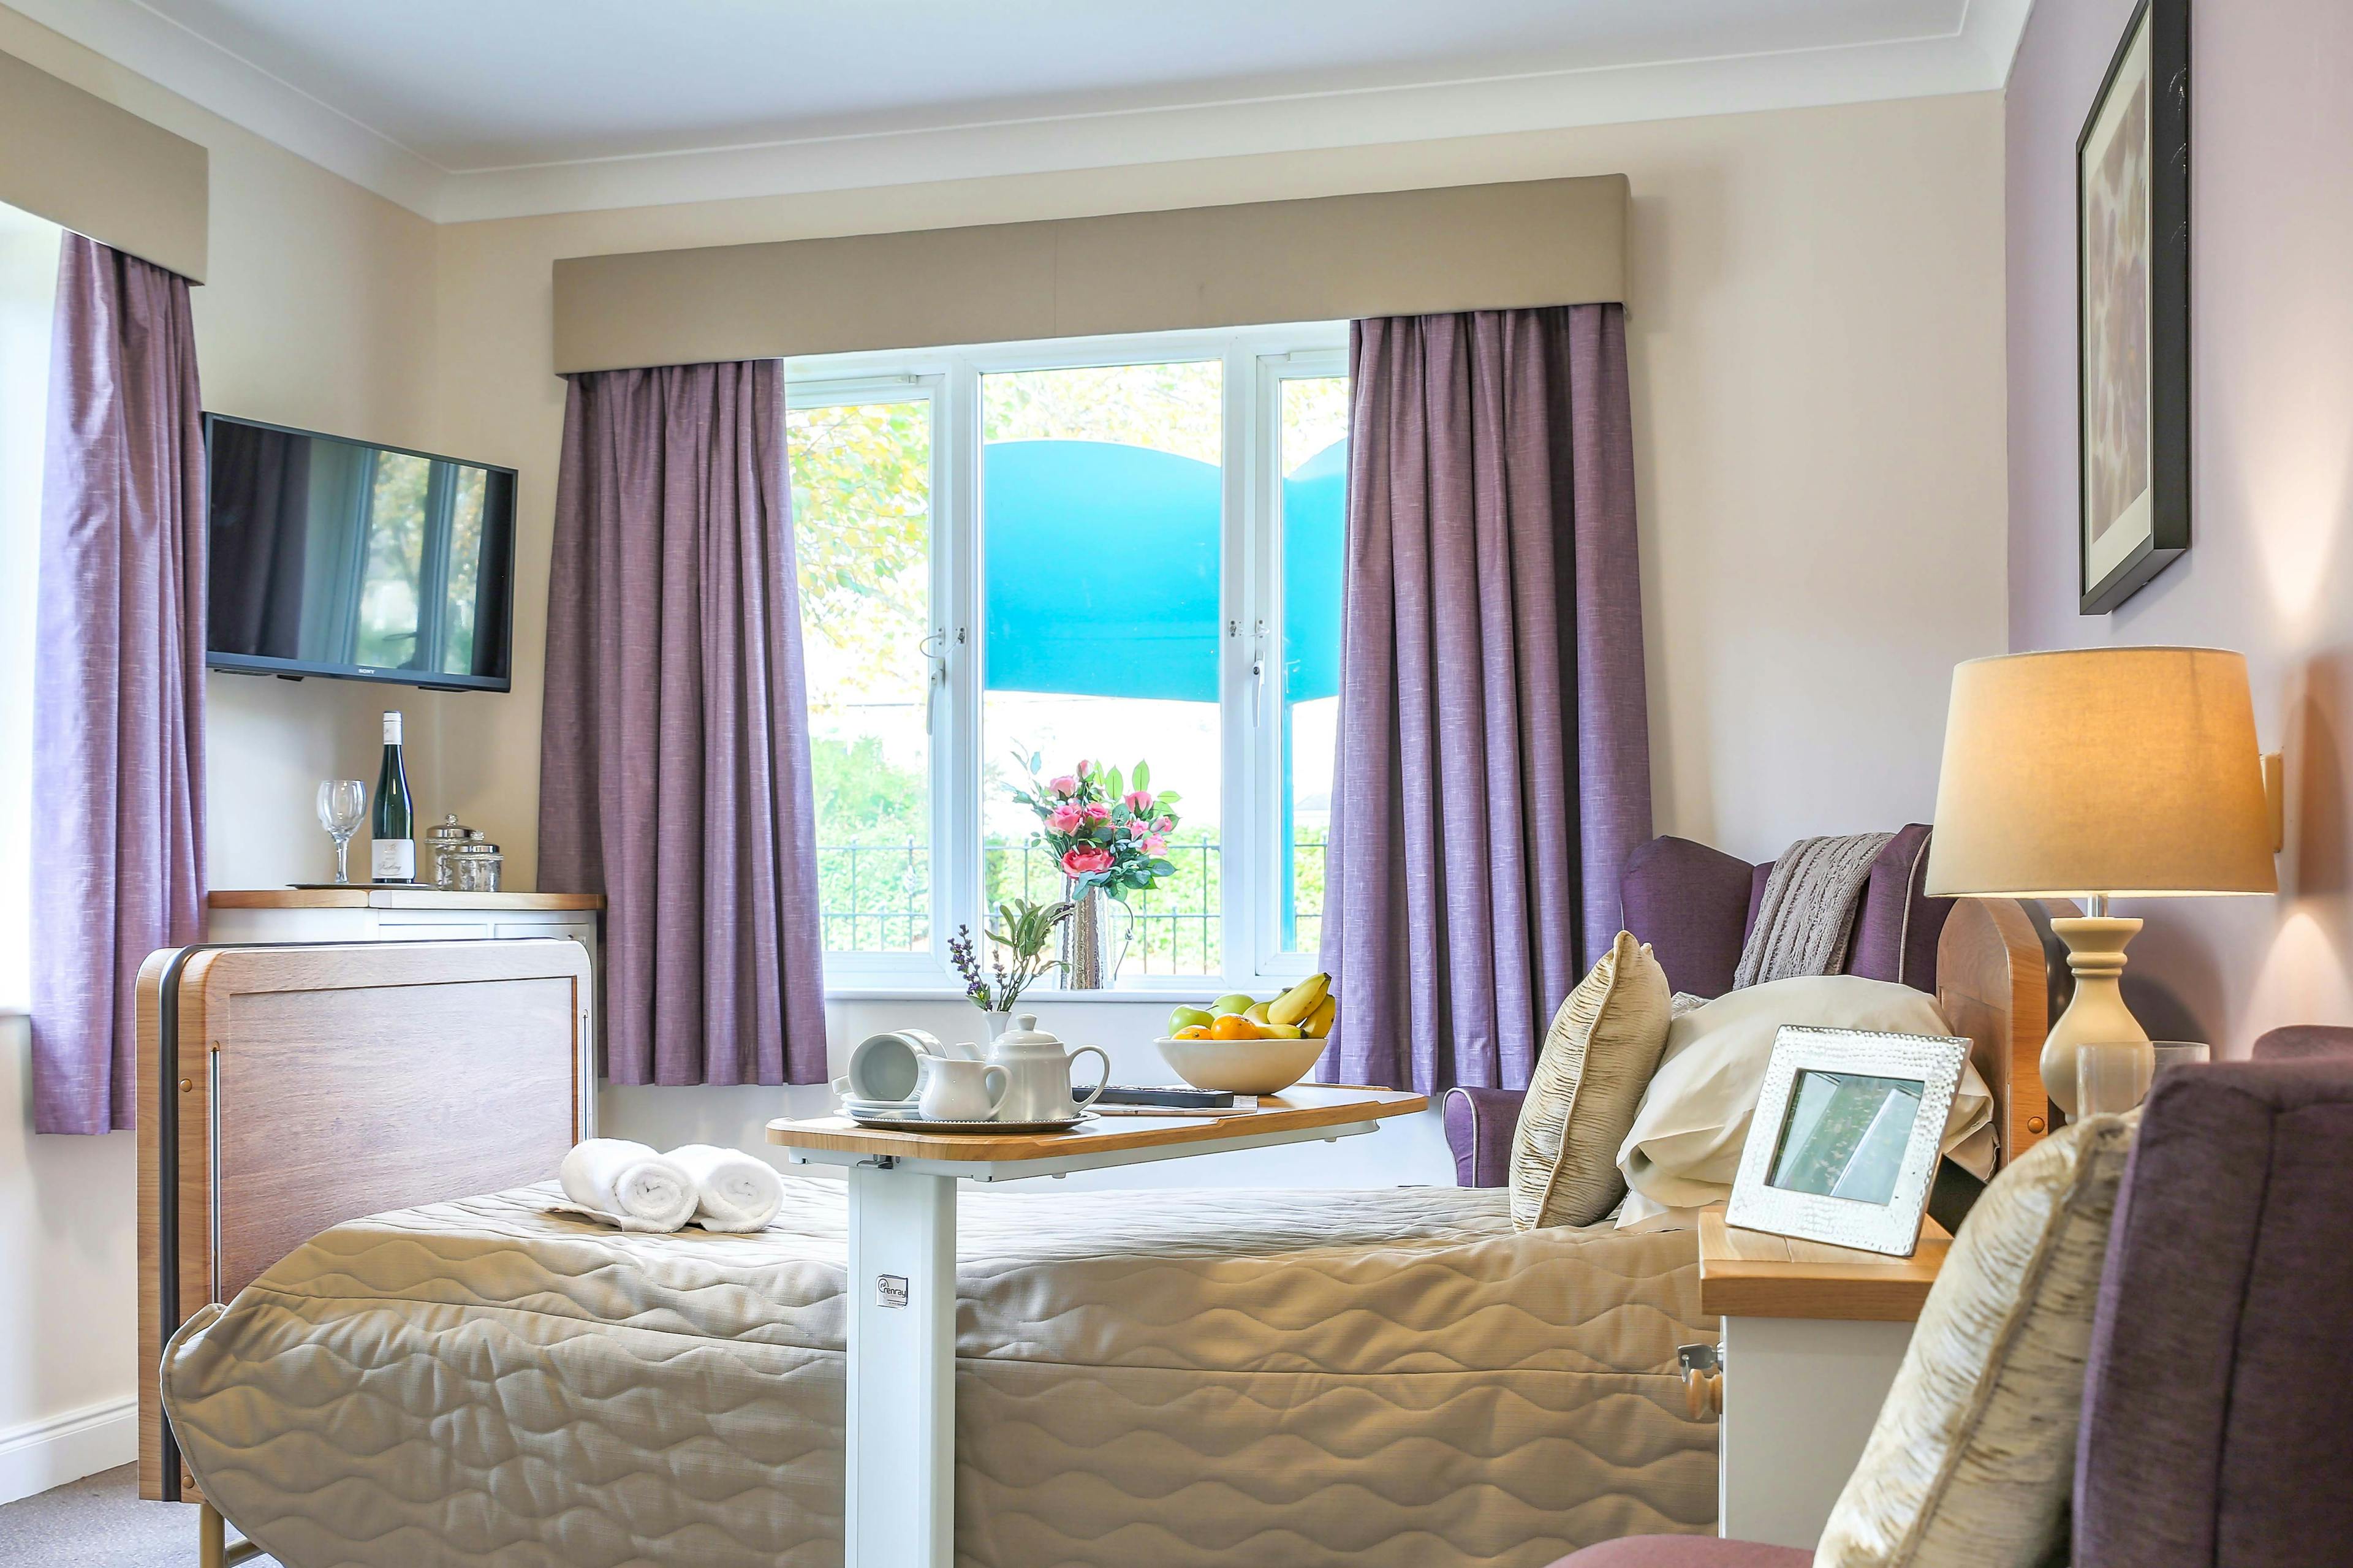 Bedroom at Station Court Care Home in Ashington, Northumberland